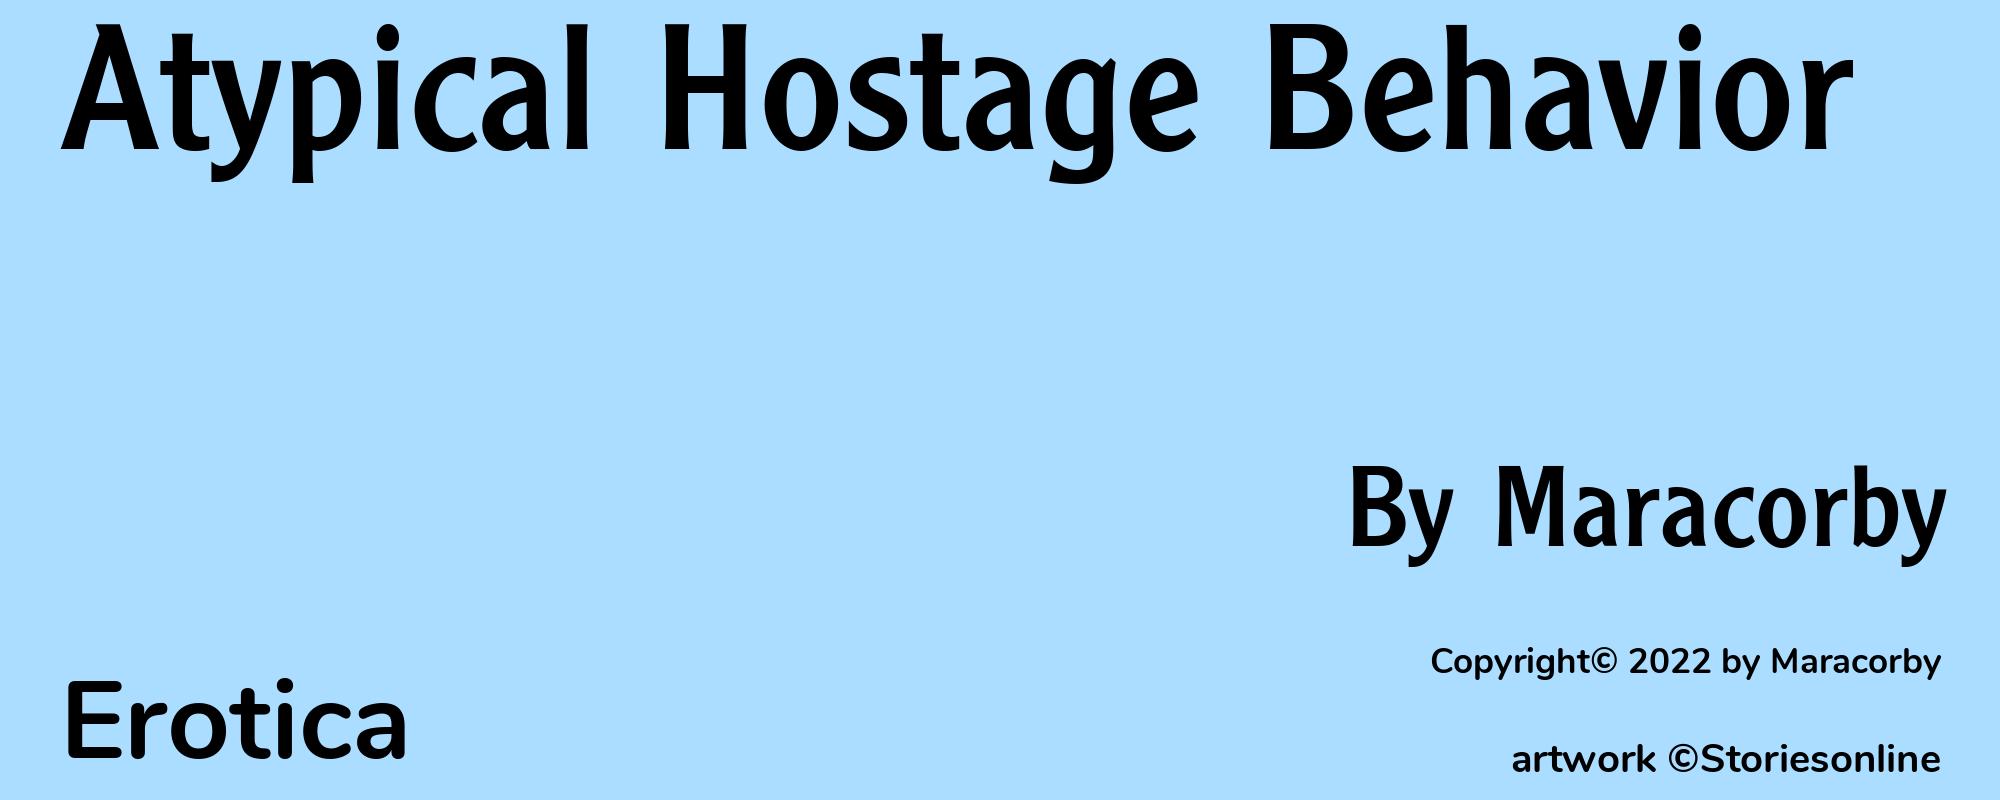 Atypical Hostage Behavior - Cover